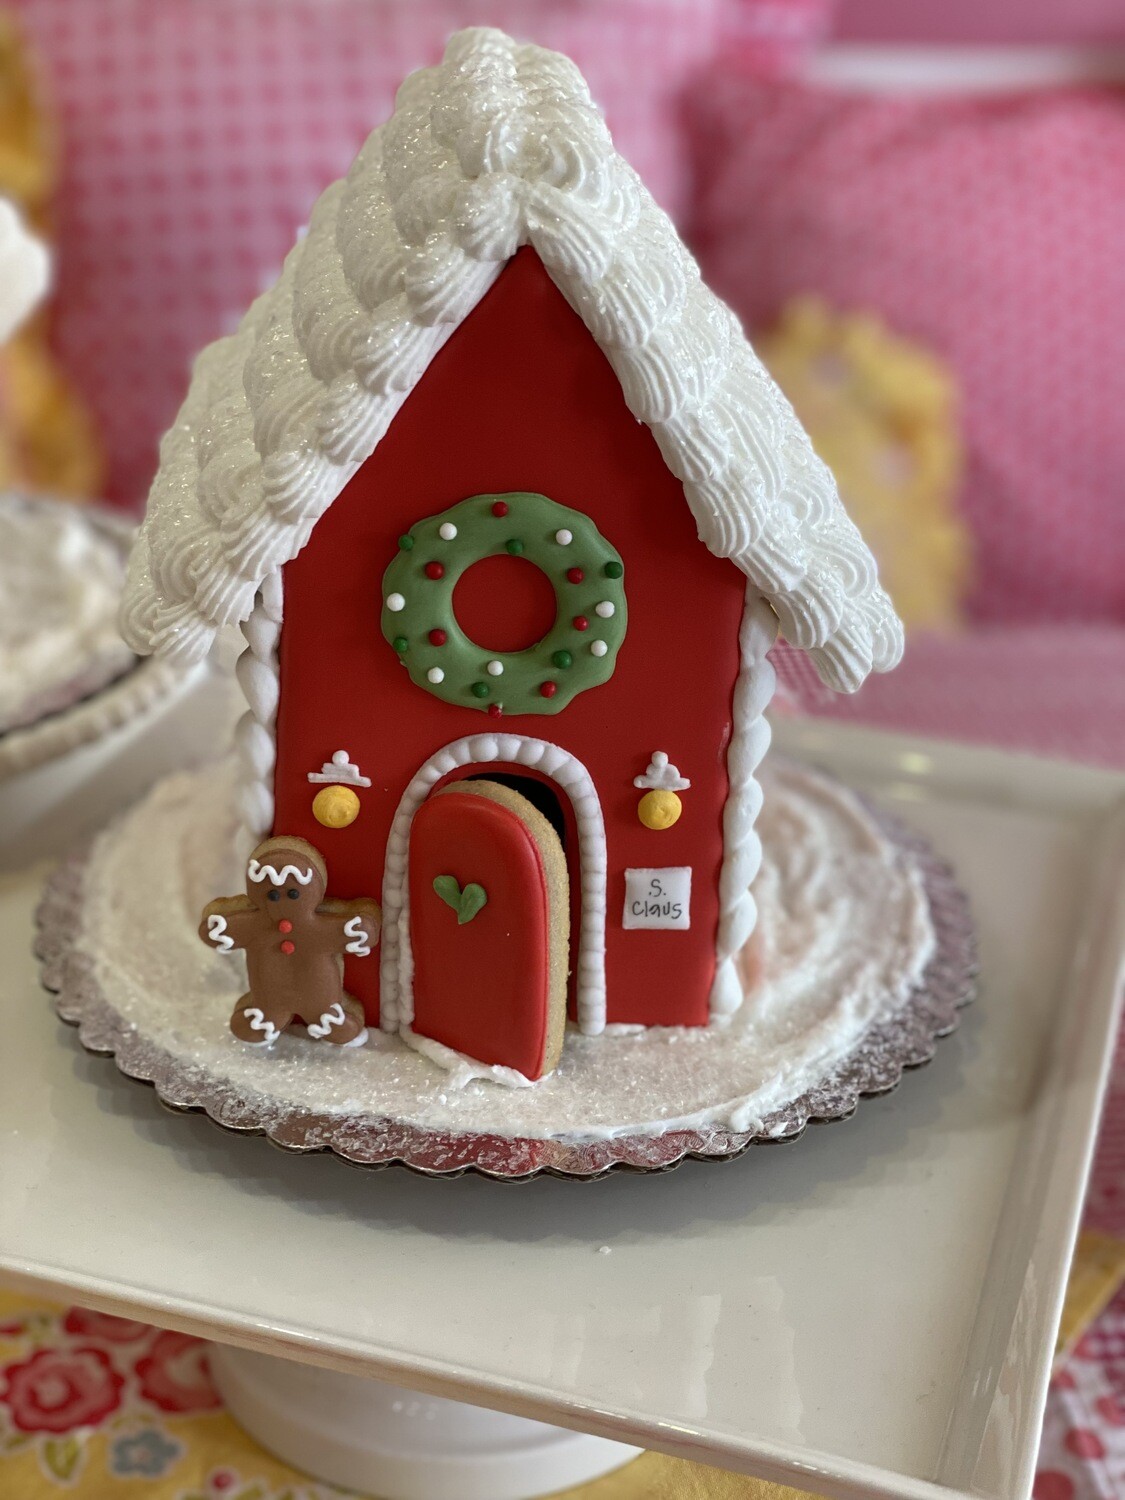 S. Claus Gingerbread House